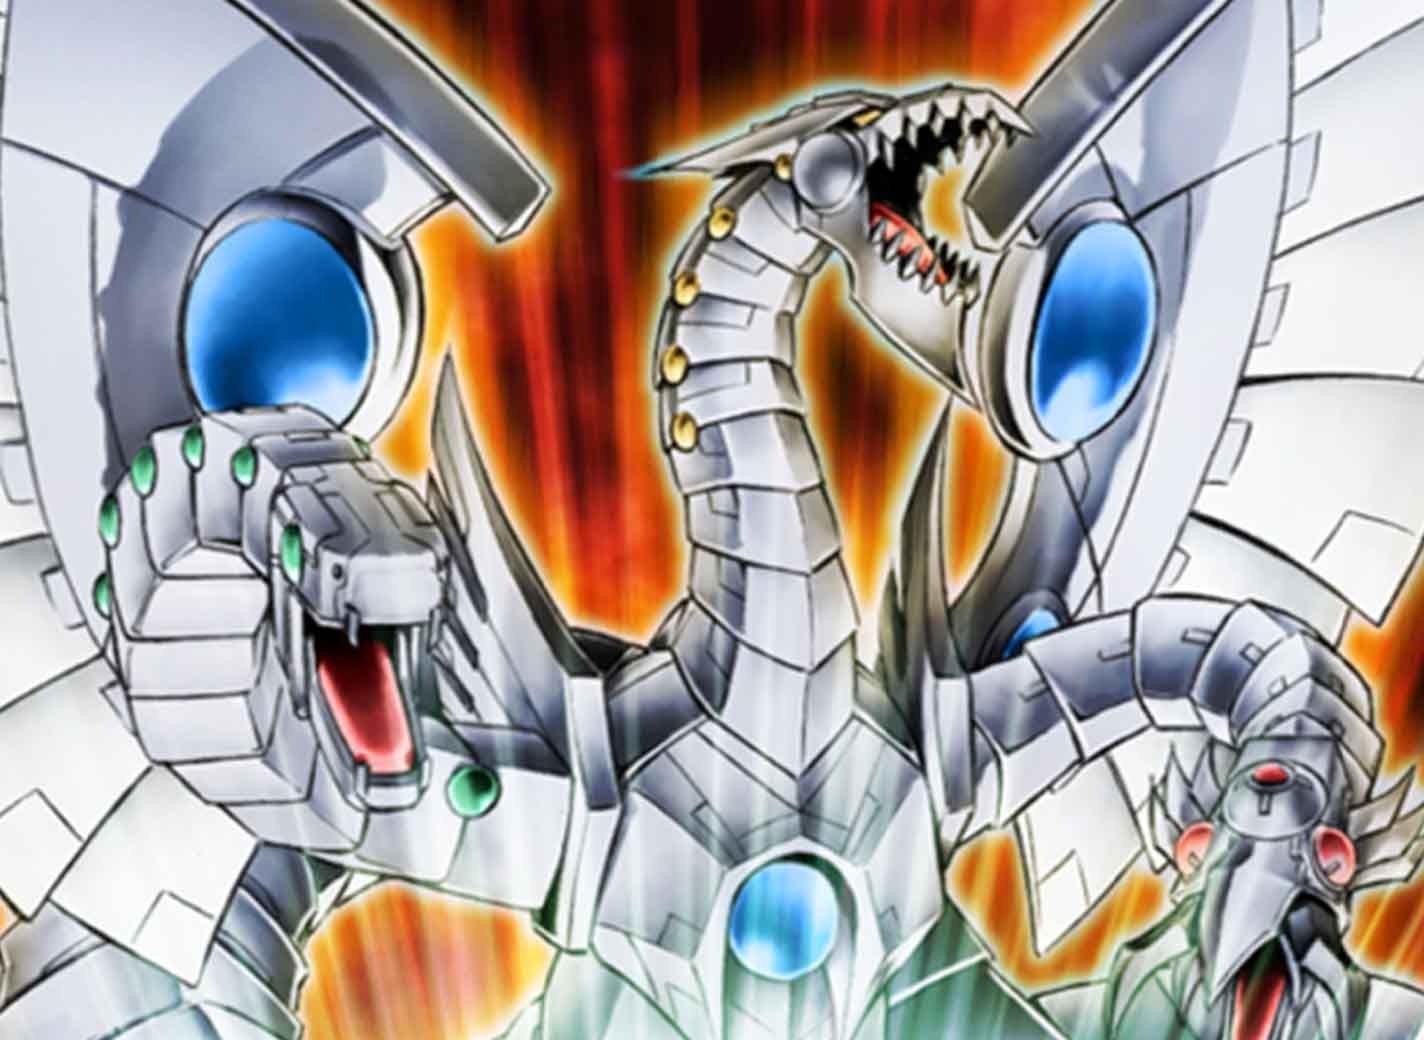 What's your favorite episode(s) of Yugioh GX? For me, a set of episodes  that always stuck with ever since I watched it all the way back in the  2000's was The King